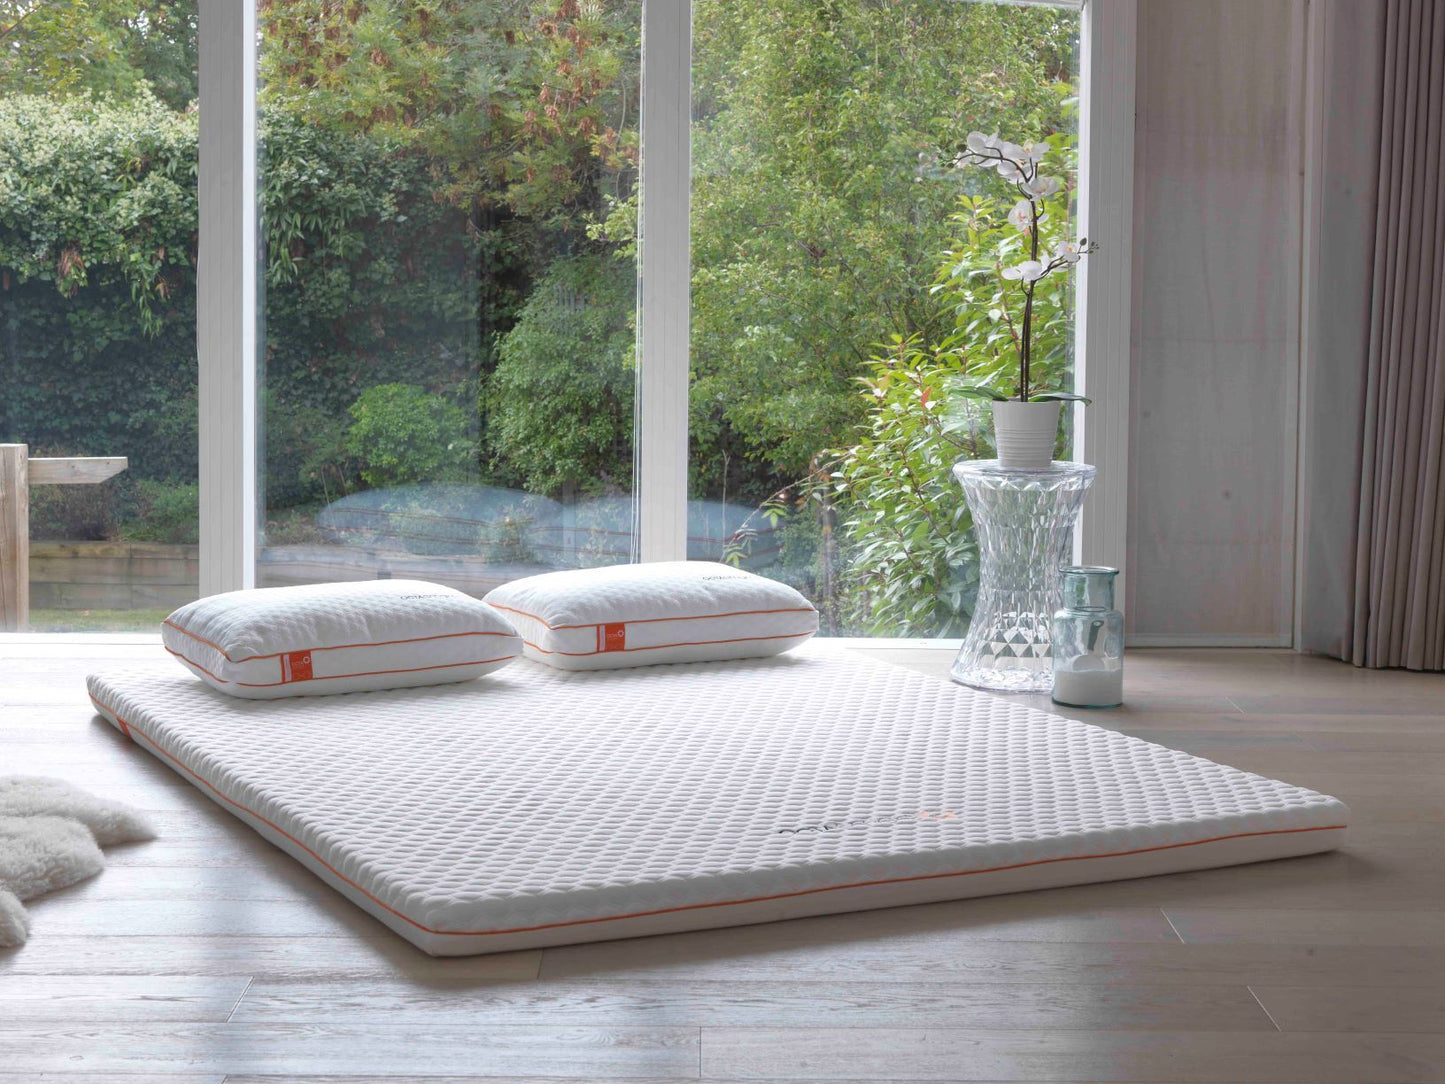 
                  
                    The Premium Mattress Topper by Dormeo® - Winter Sale - 30% Off Discount Applied
                  
                